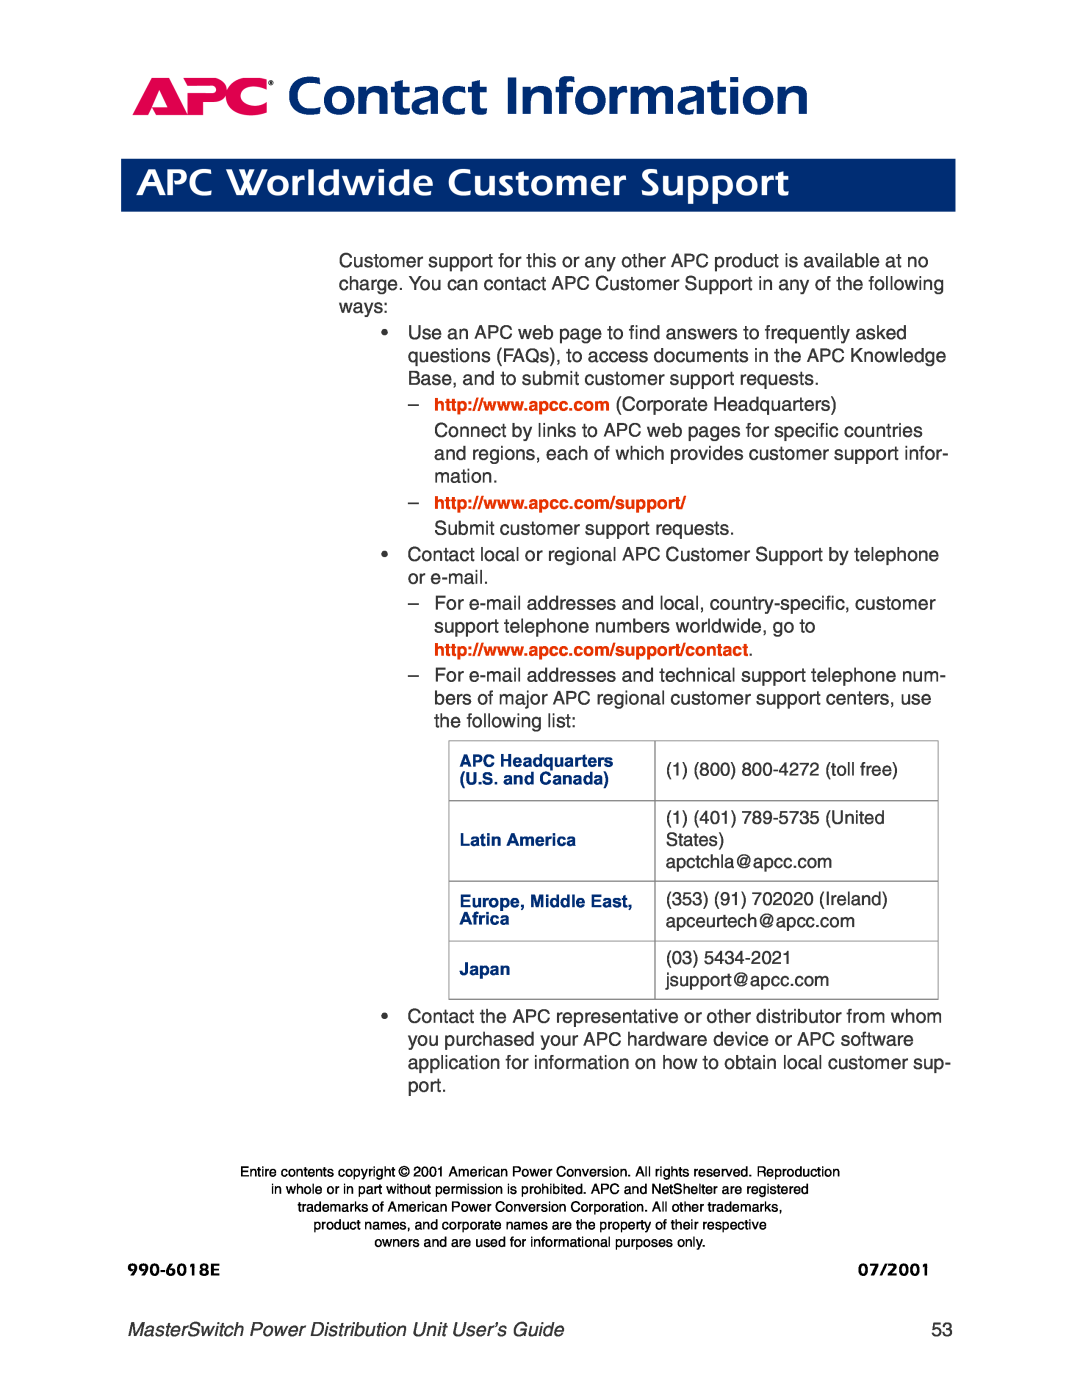 APC AP9211, AP9218 APC Worldwide Customer Support, Contact Information, MasterSwitch Power Distribution Unit User’s Guide 